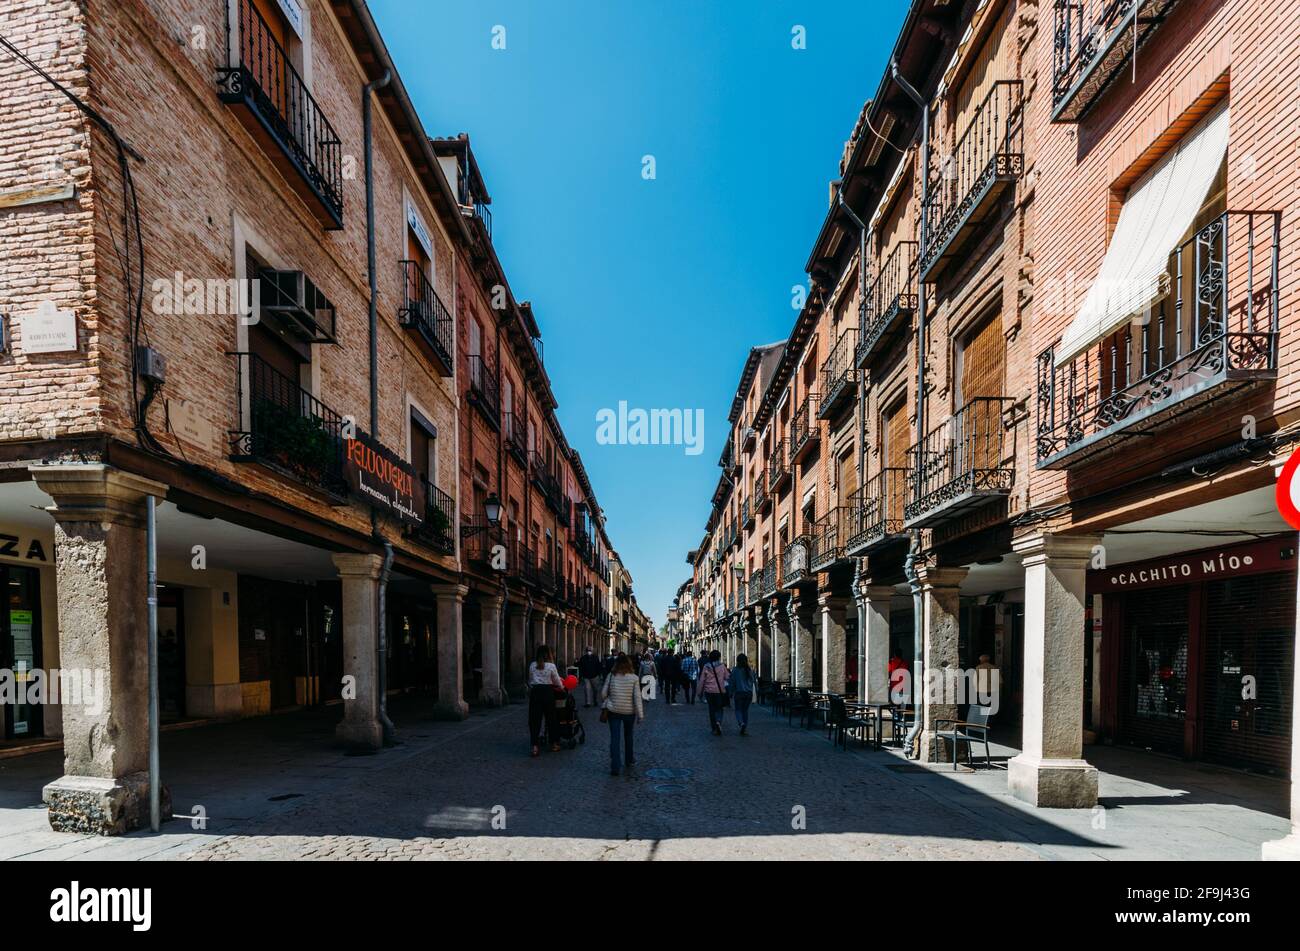 Main street (Calle Mayor) with curious buildings, street cafes and people Stock Photo